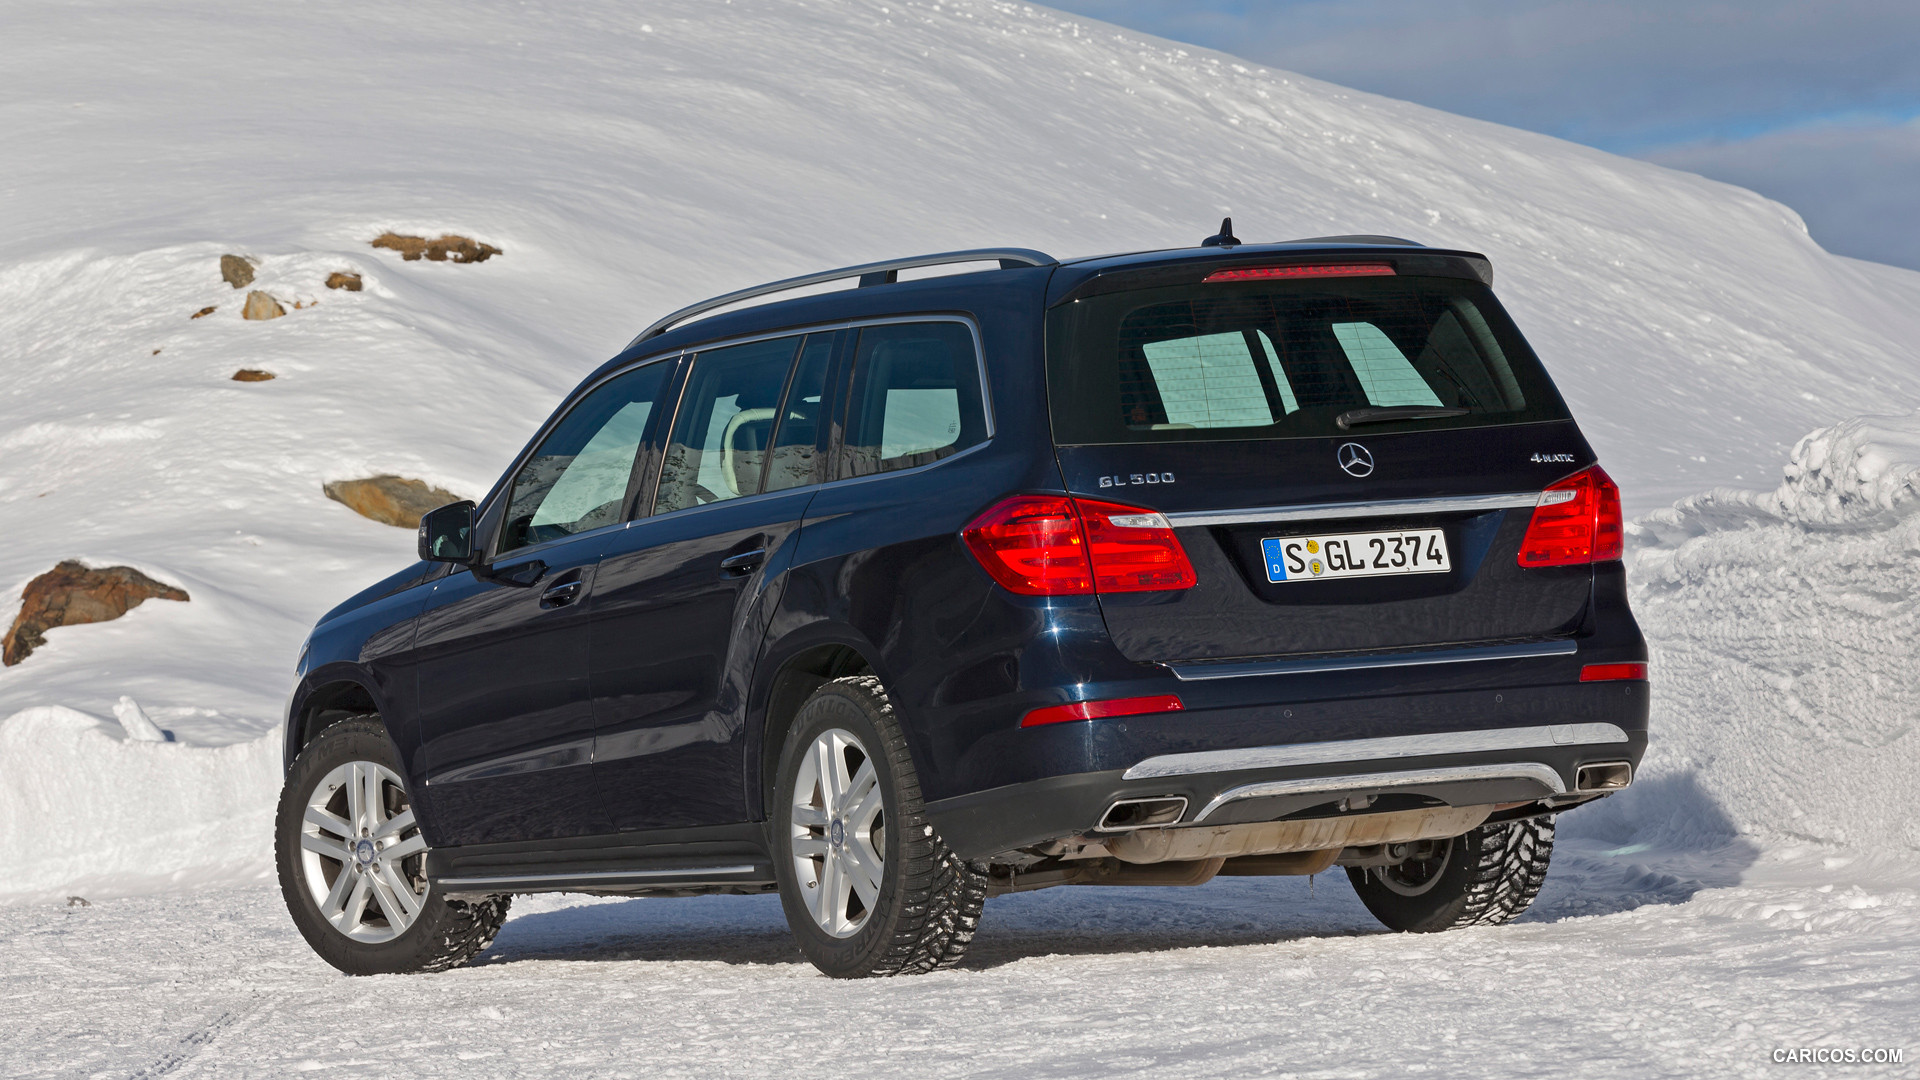 2013 Mercedes-Benz GL 500 4MATIC on Snow - Rear, #236 of 259